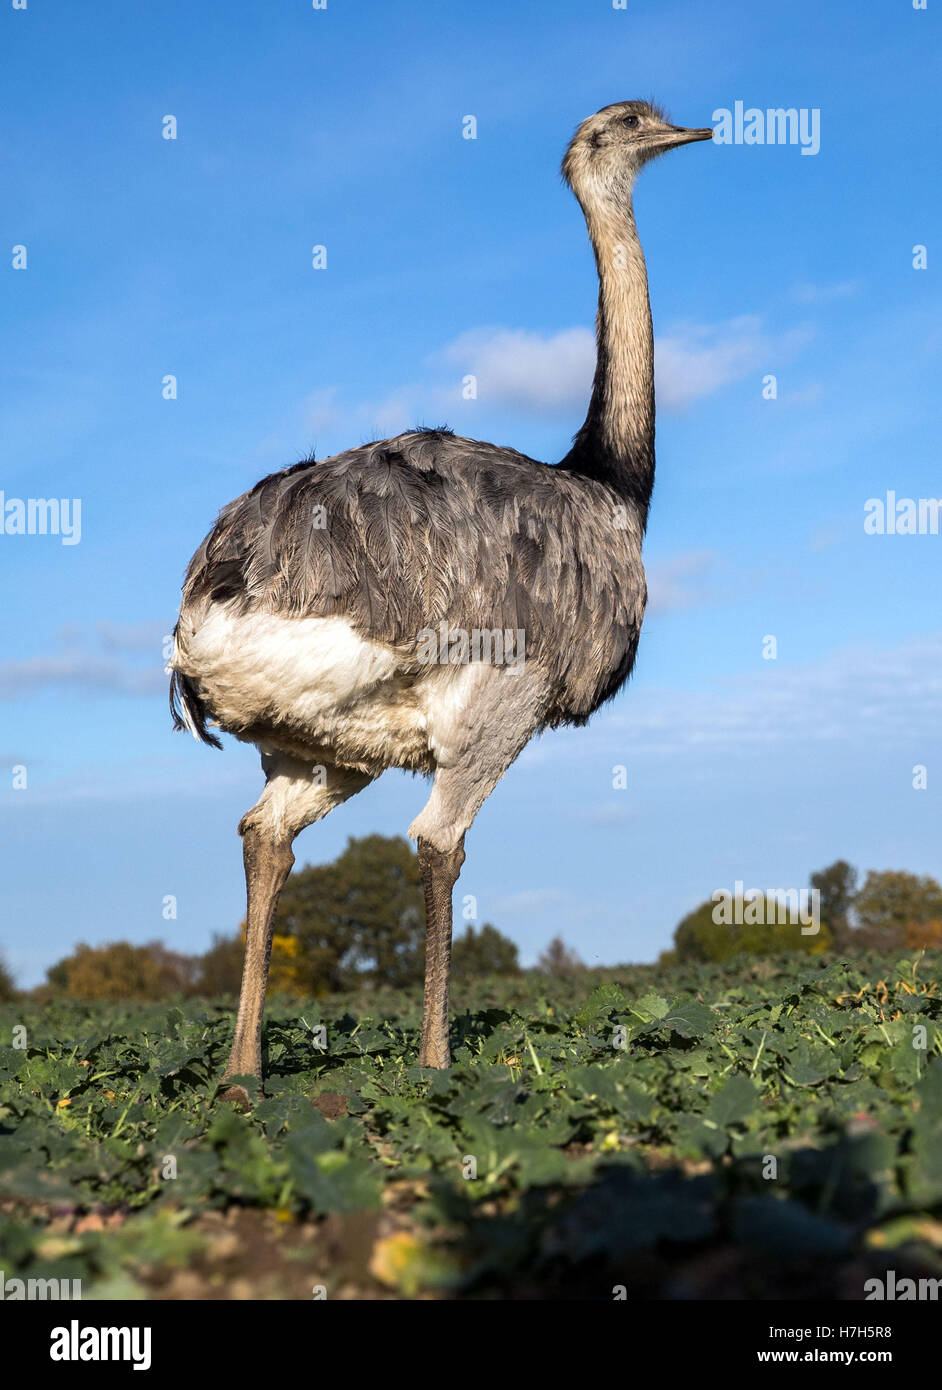 A Wild Nandu bird in a field near Schattin, Germany, 30 October 2016. In the current survey, scientists from the Nandu Monitoring working group identified more than 200 wild Nandus in the border area between Mecklenburg-Western Pomerania and Schleswig-Holstein. The immigrant animals are floating about in an area of around 150 square kilometers. At the end of the 1990s, some of the up-to-one-and-a-half-meter-large birds escaped from a breeder in Schleswig-Holstein. Since then, the Nandus, which fall under the Washington Convention on the protection of species (CITES) and the German Federal Natu Stock Photo